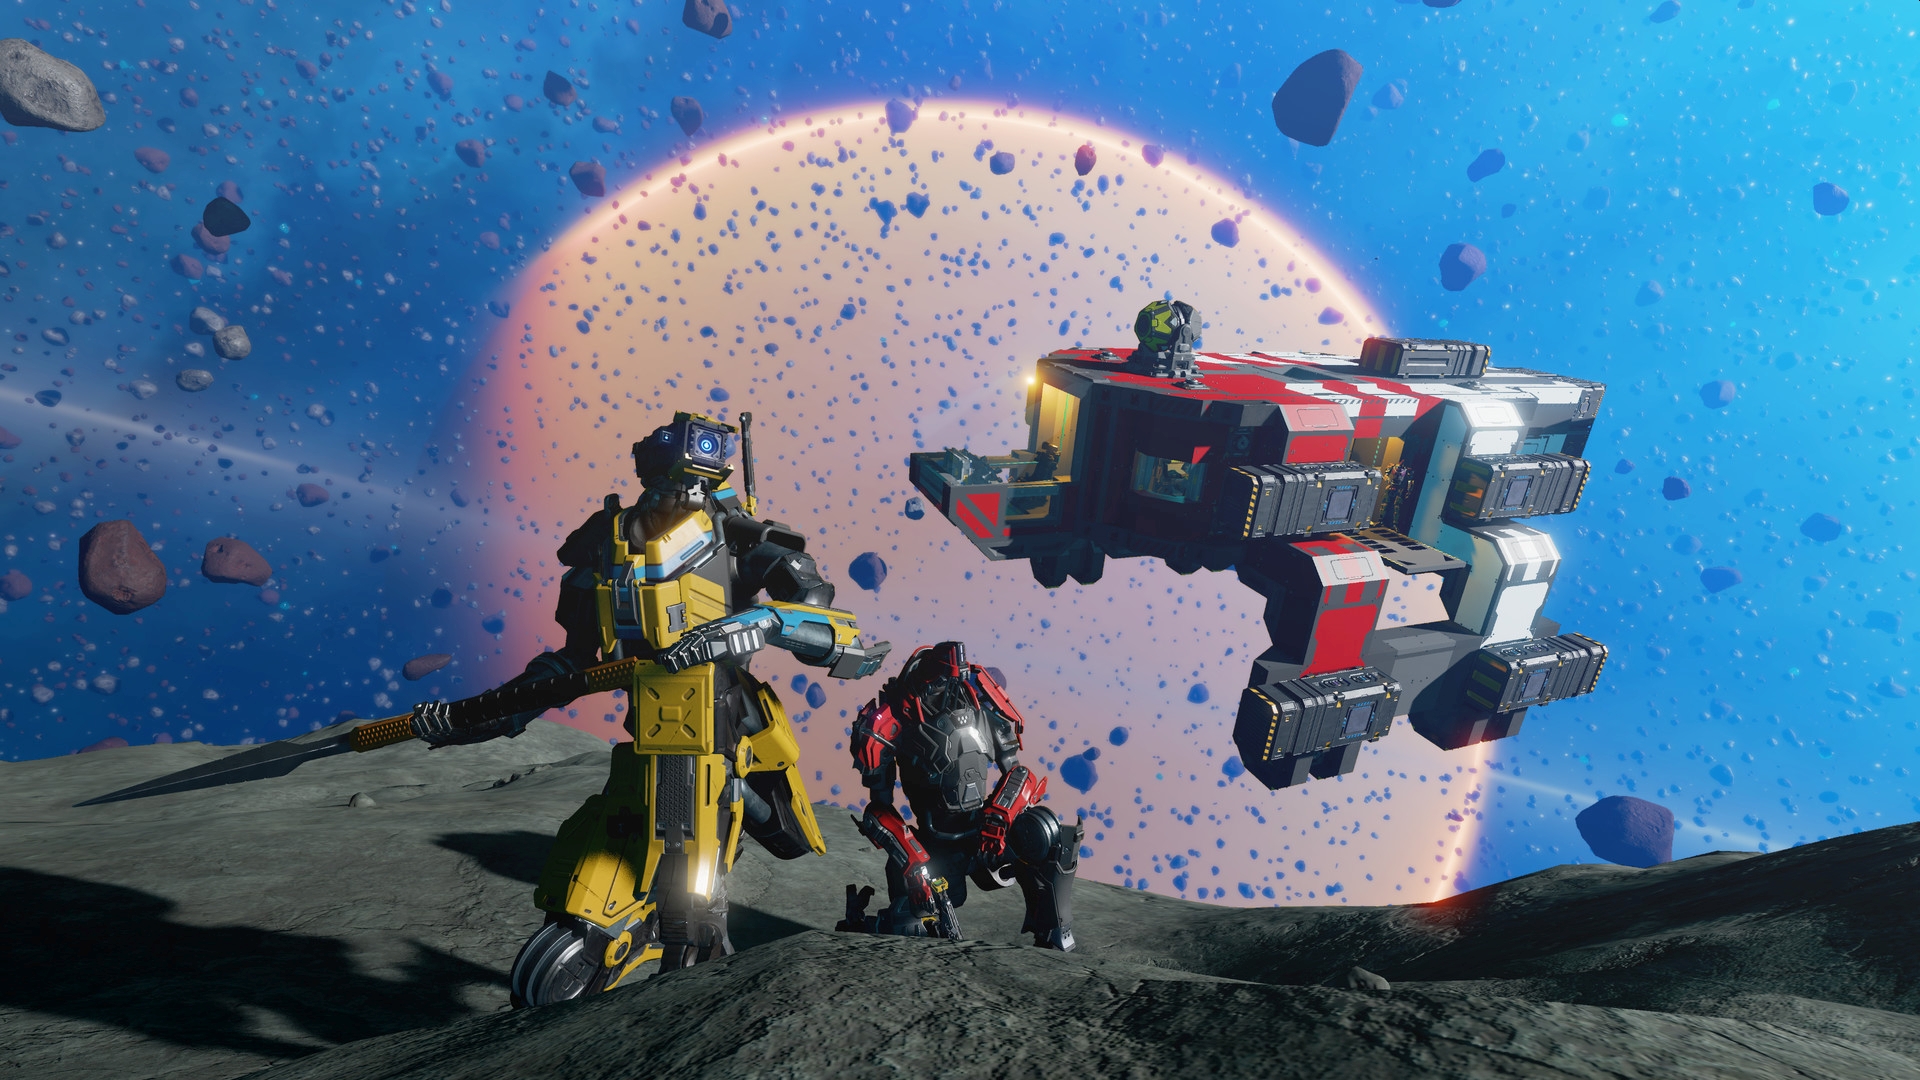 Frozenbyte Releases New Introduction Video For Upcoming Sci-Fi MMO Starbase